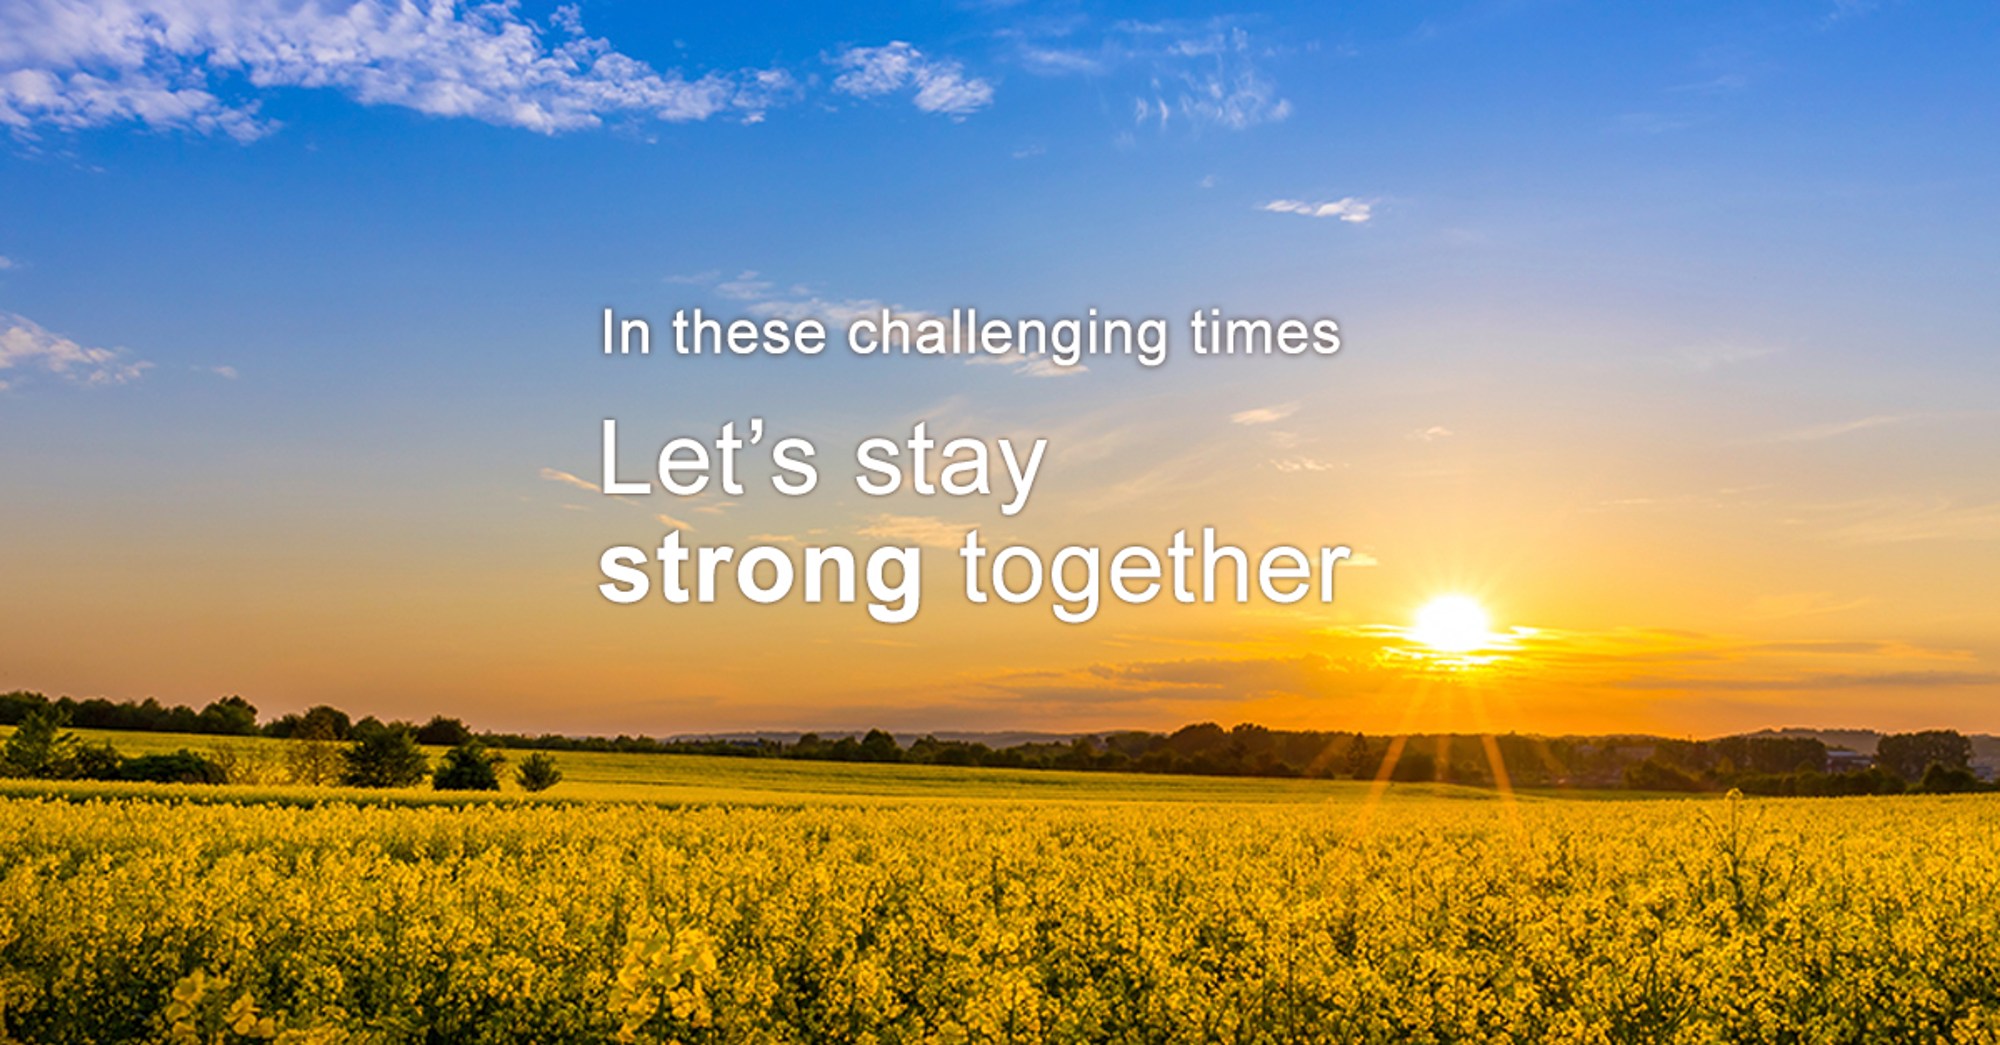 Let's stay strong together